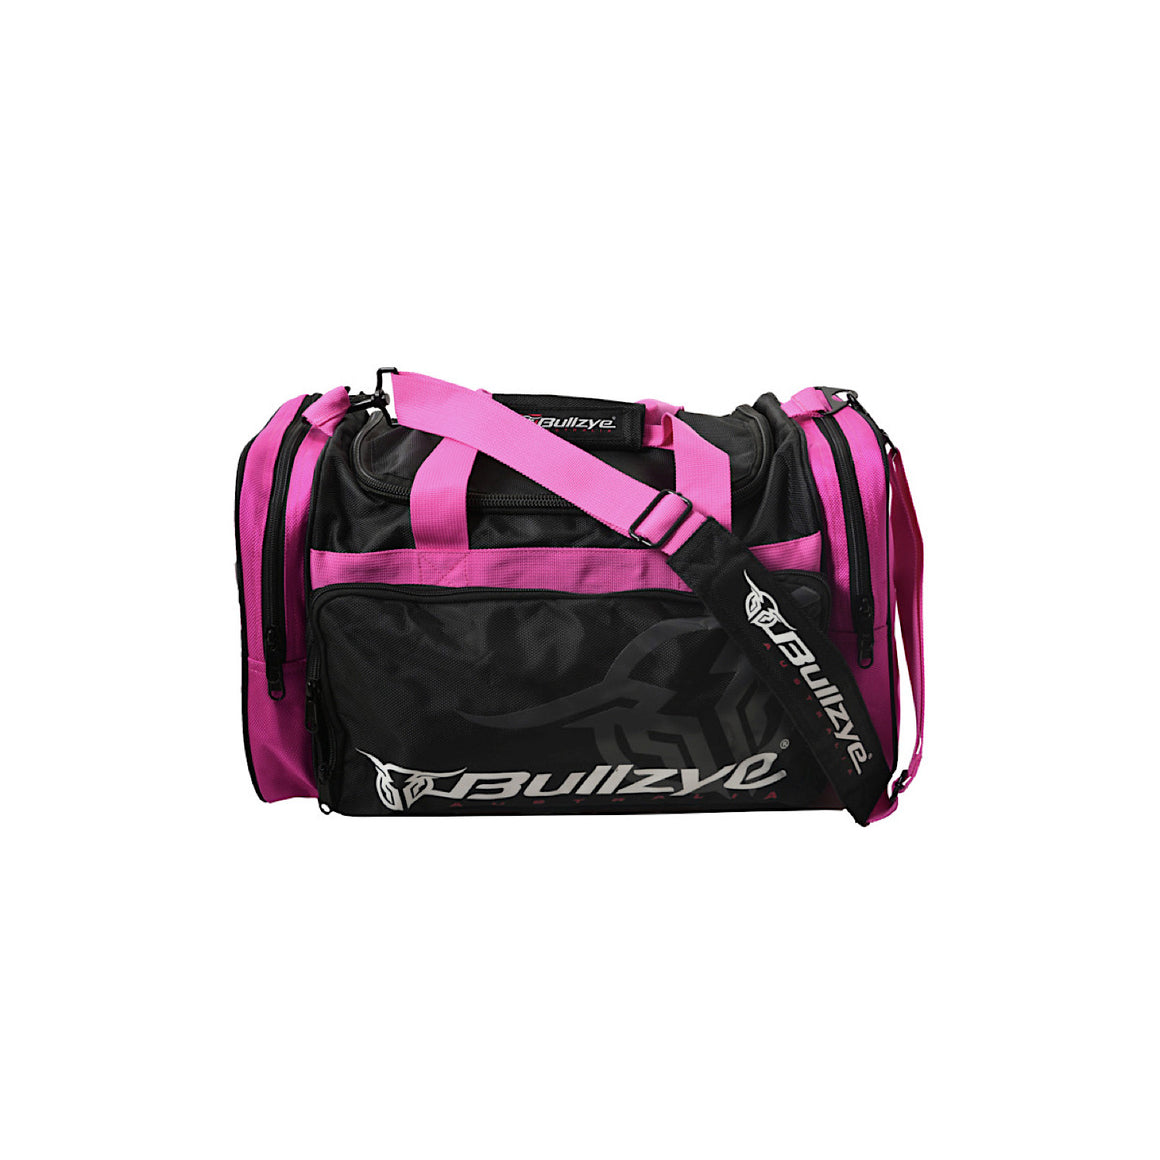 Bullzye Traction Small Gear Bag - Pink/Black